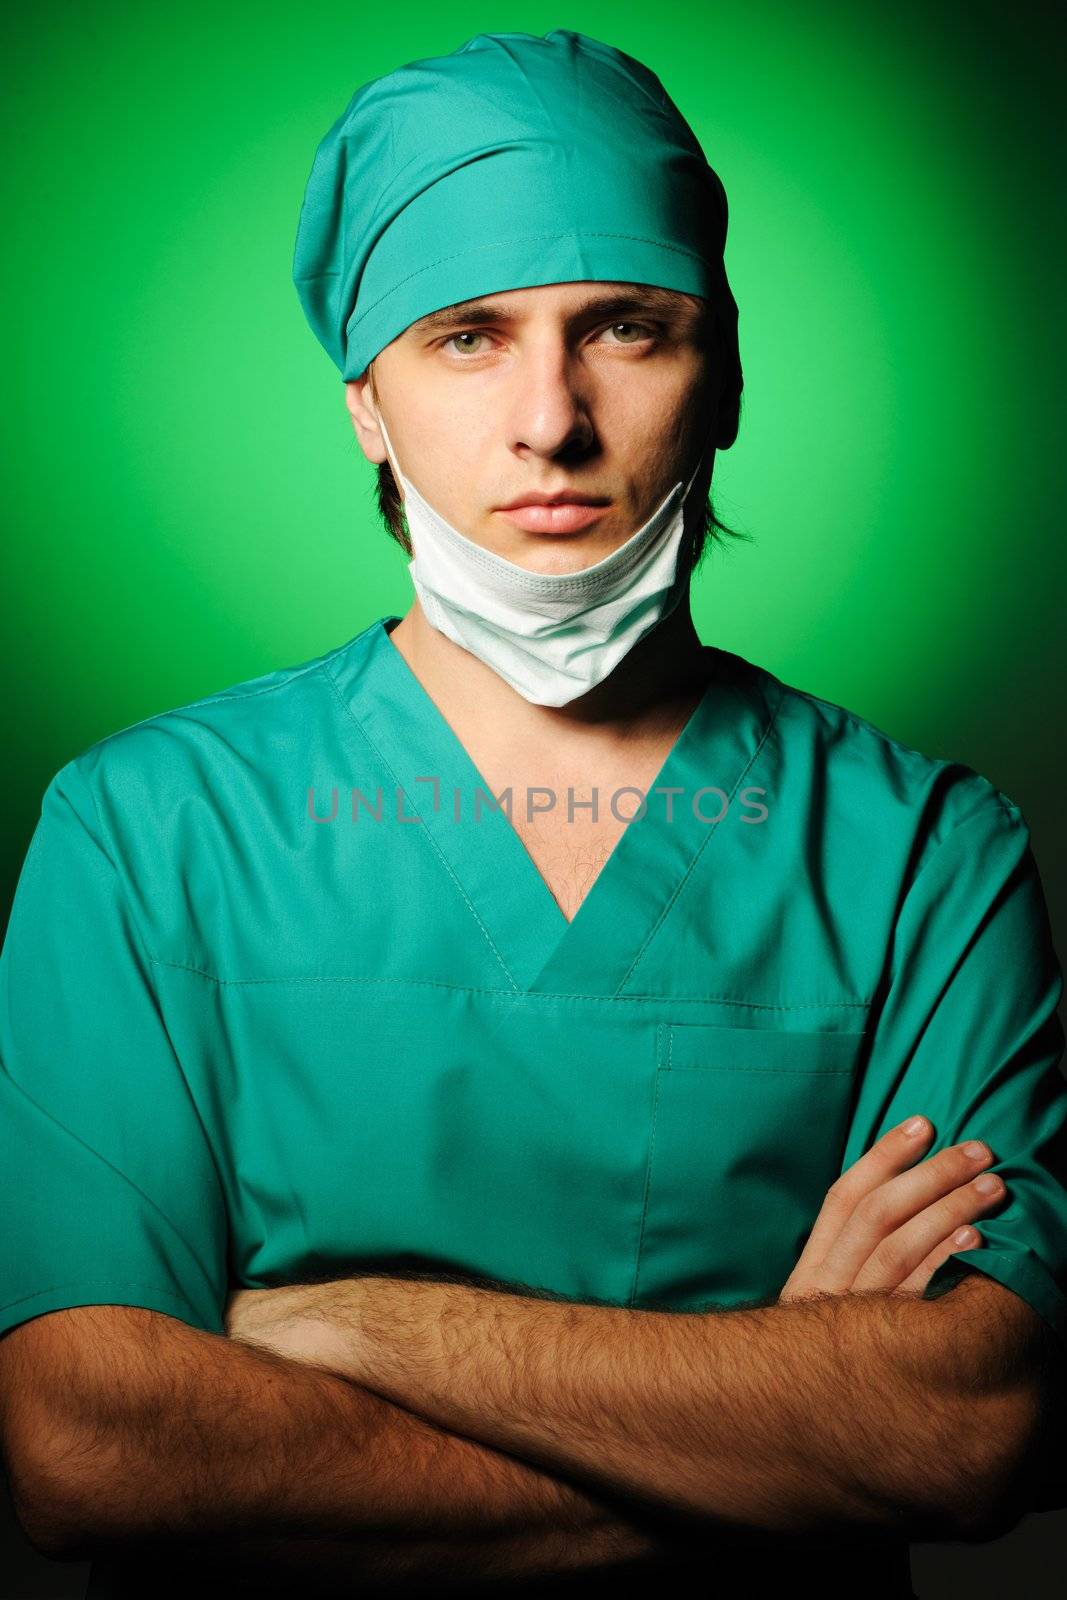 Surgeon with mask over green